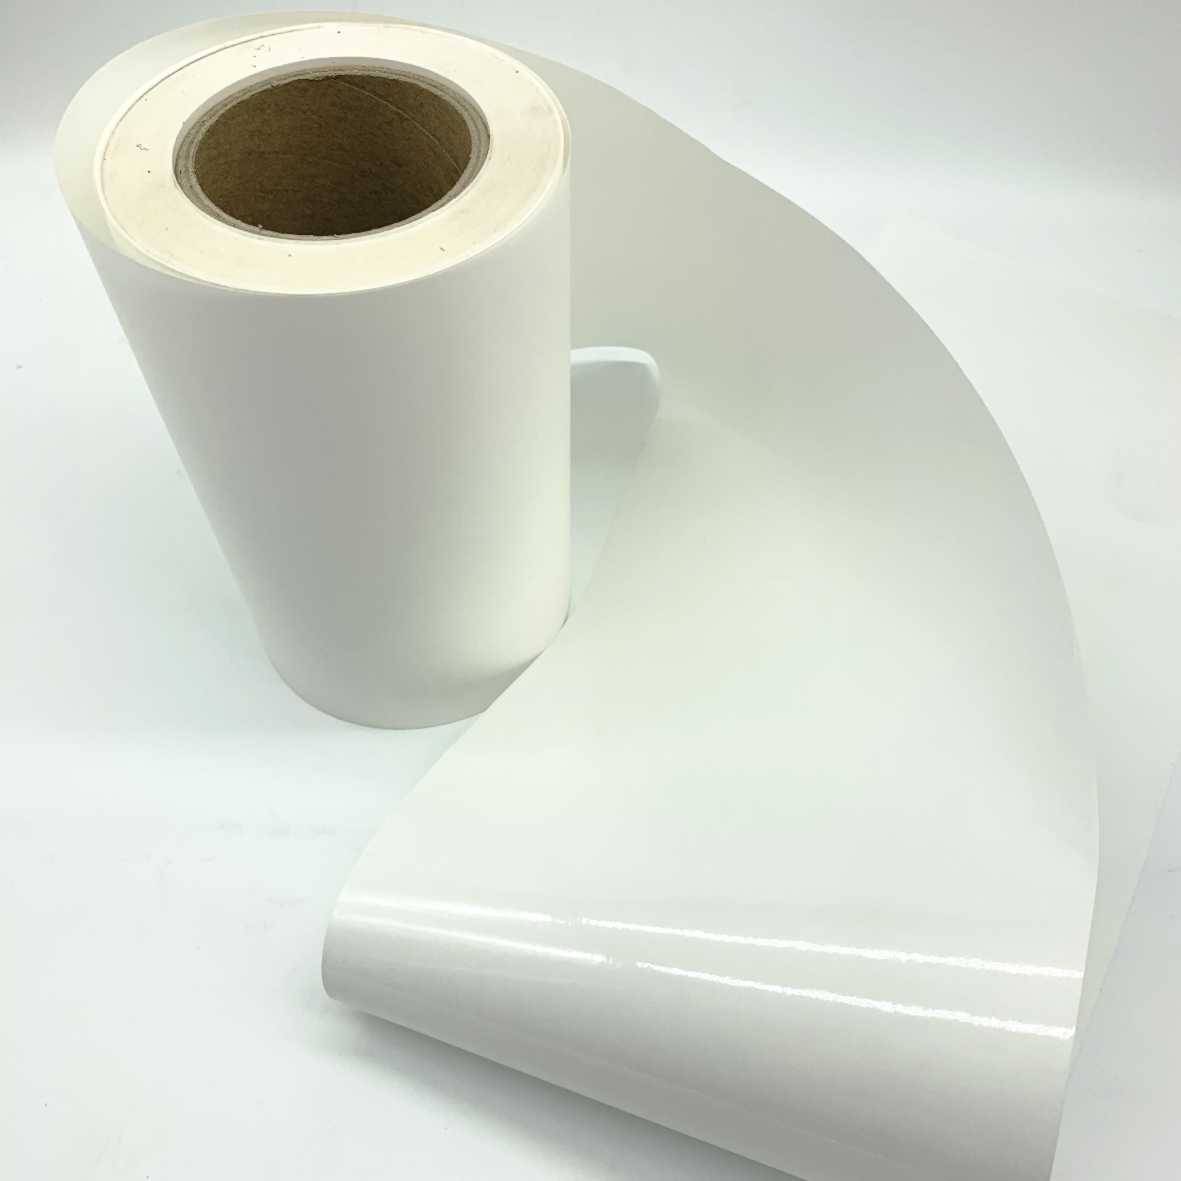 Best Tamper Evident Glossy White Non Transfer Void Label Material,36u Matte White No Residue